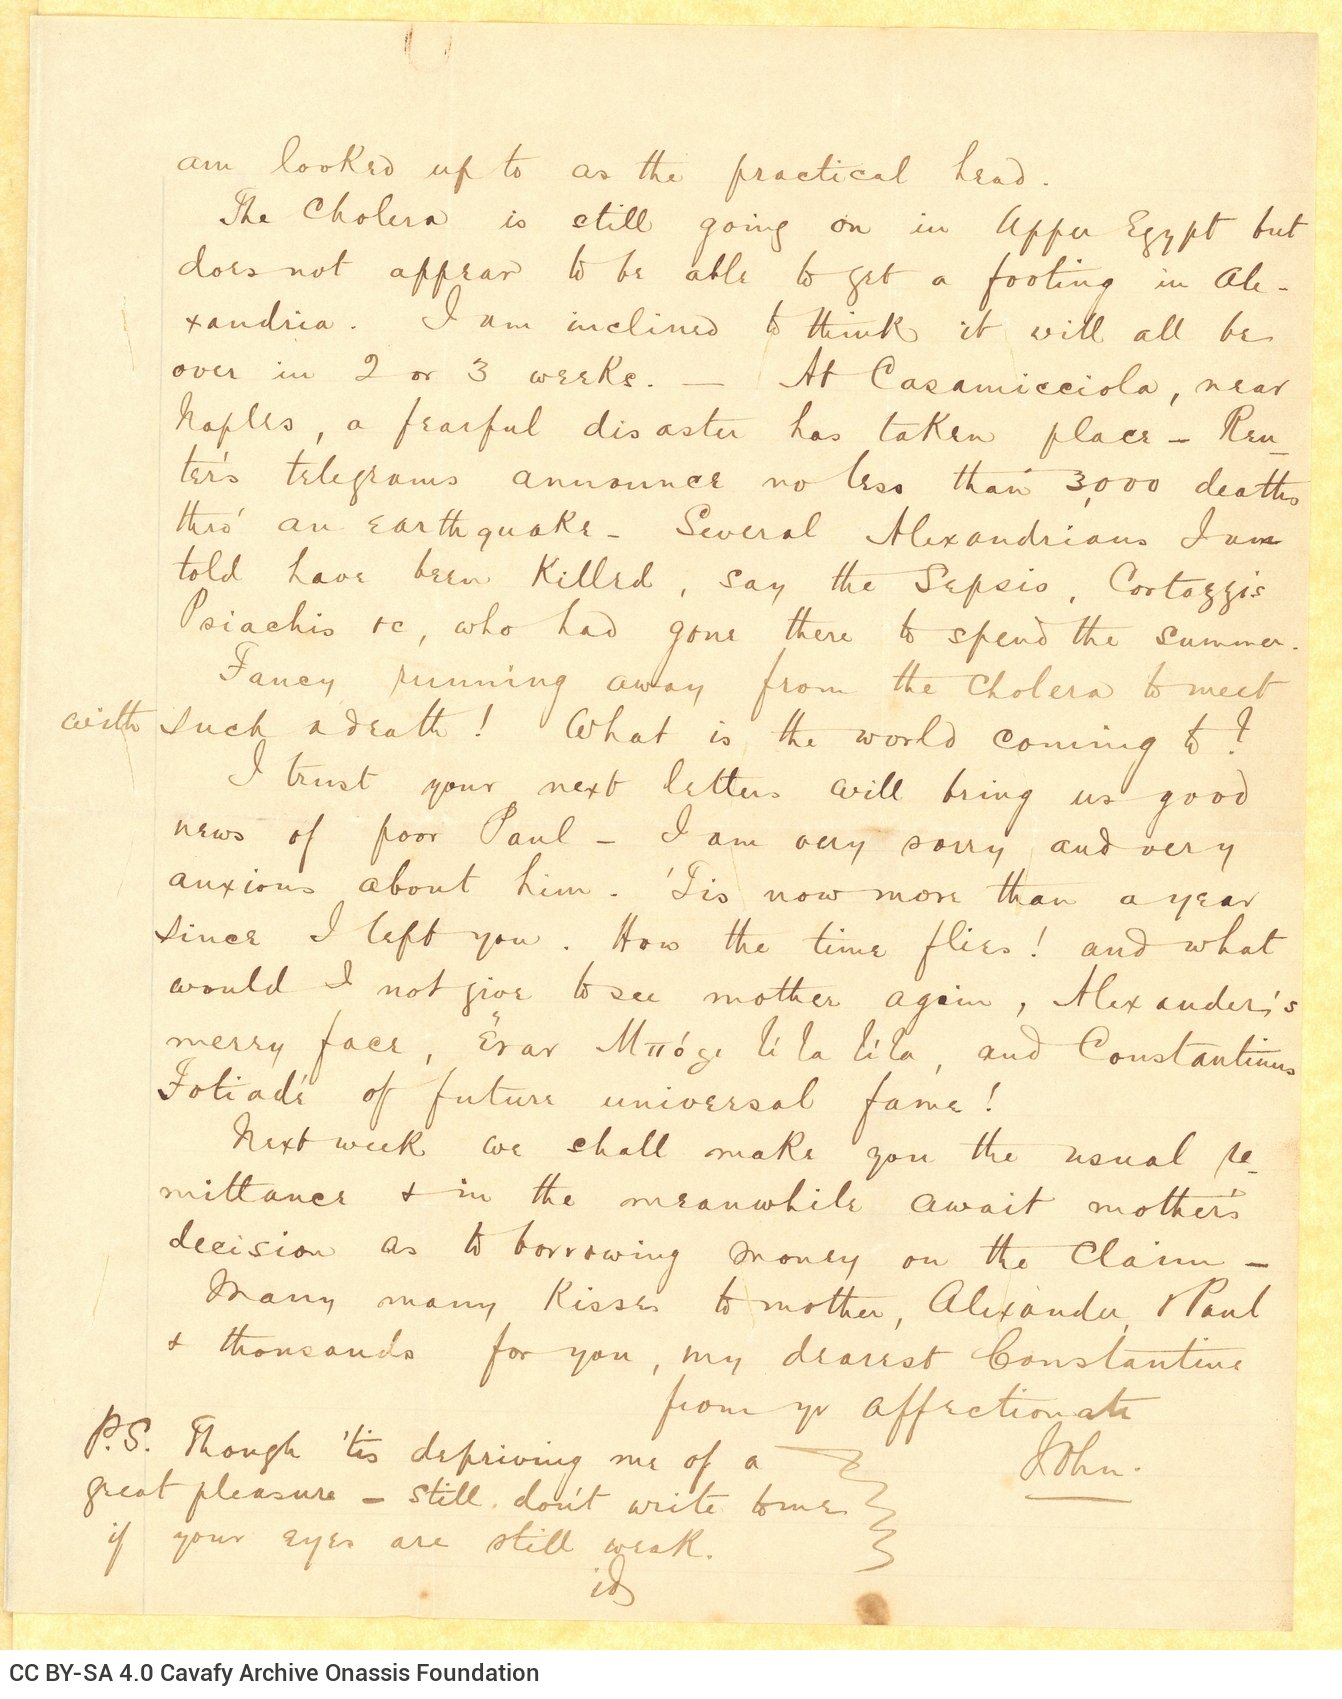 Handwritten letter by John Cavafy to C. P. Cavafy on the first and third pages of a double sheet letterhead of the R. J. Moss